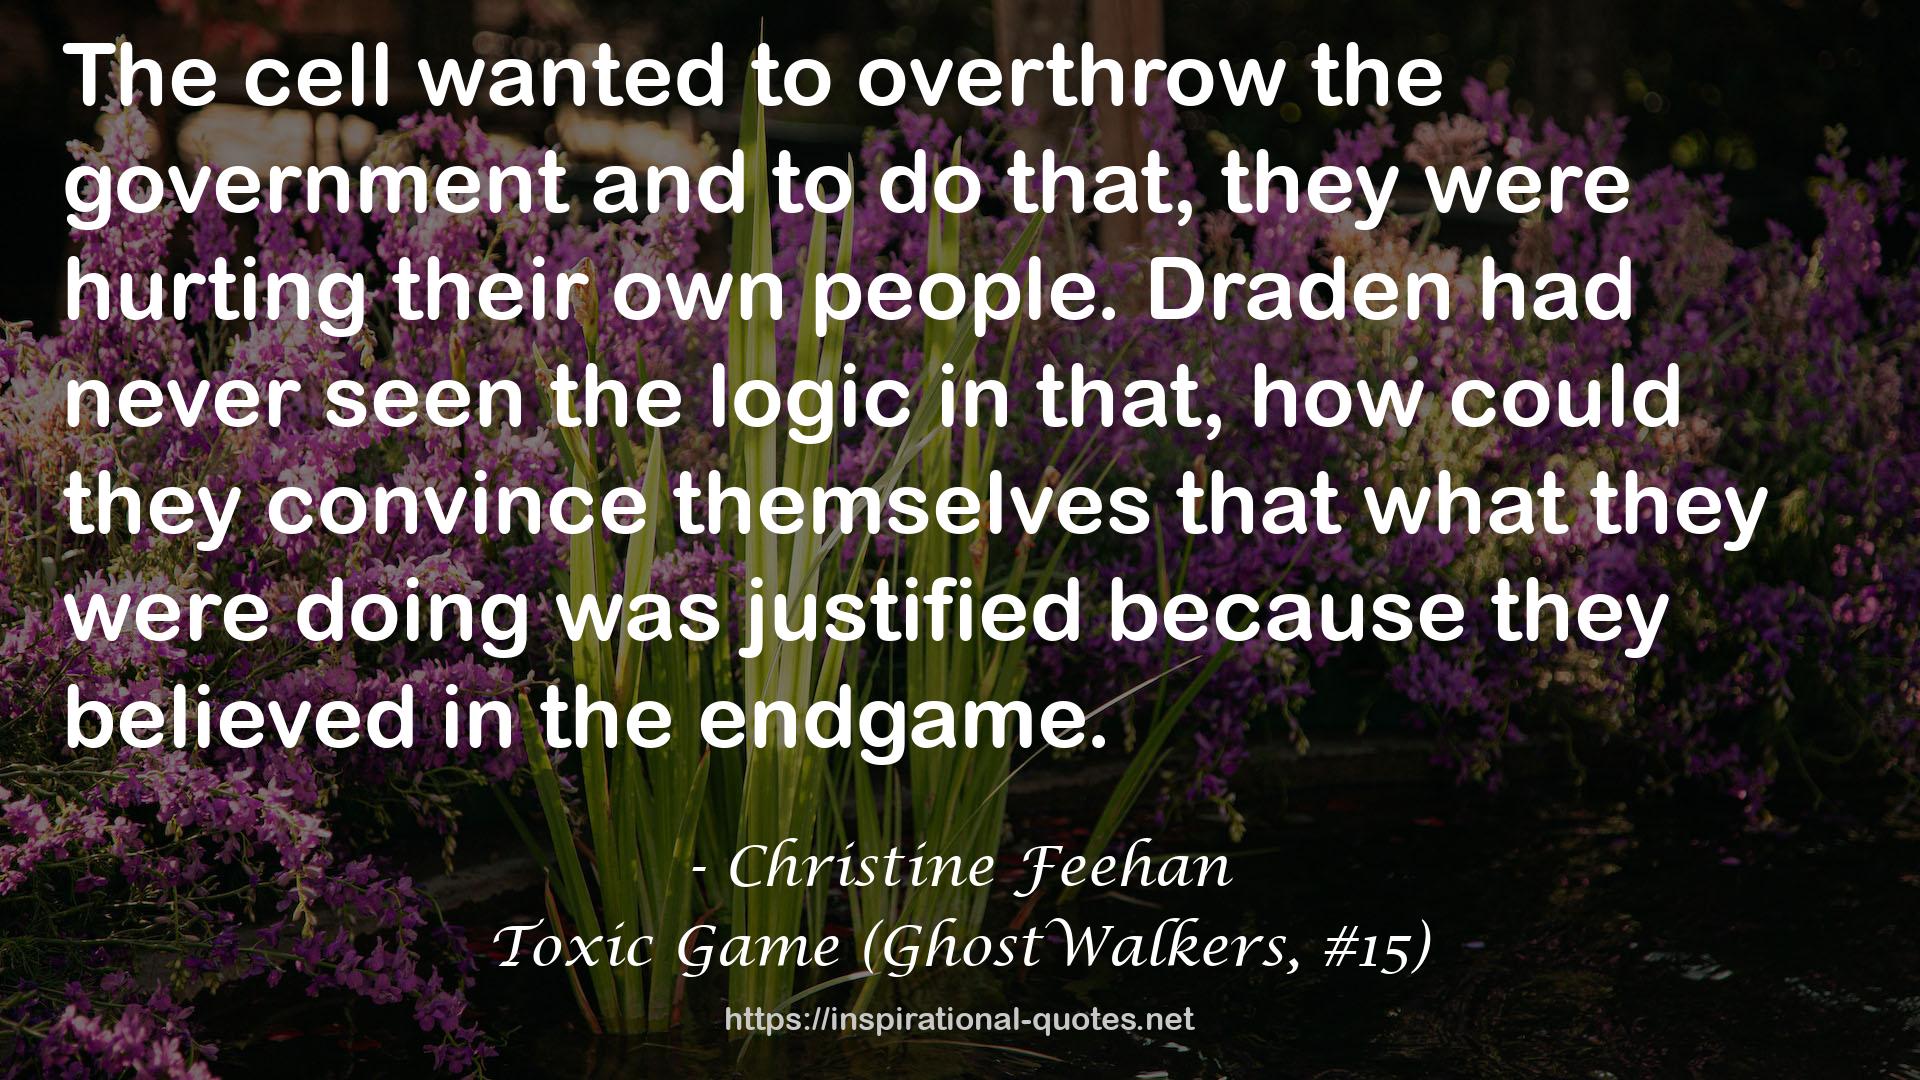 Toxic Game (GhostWalkers, #15) QUOTES